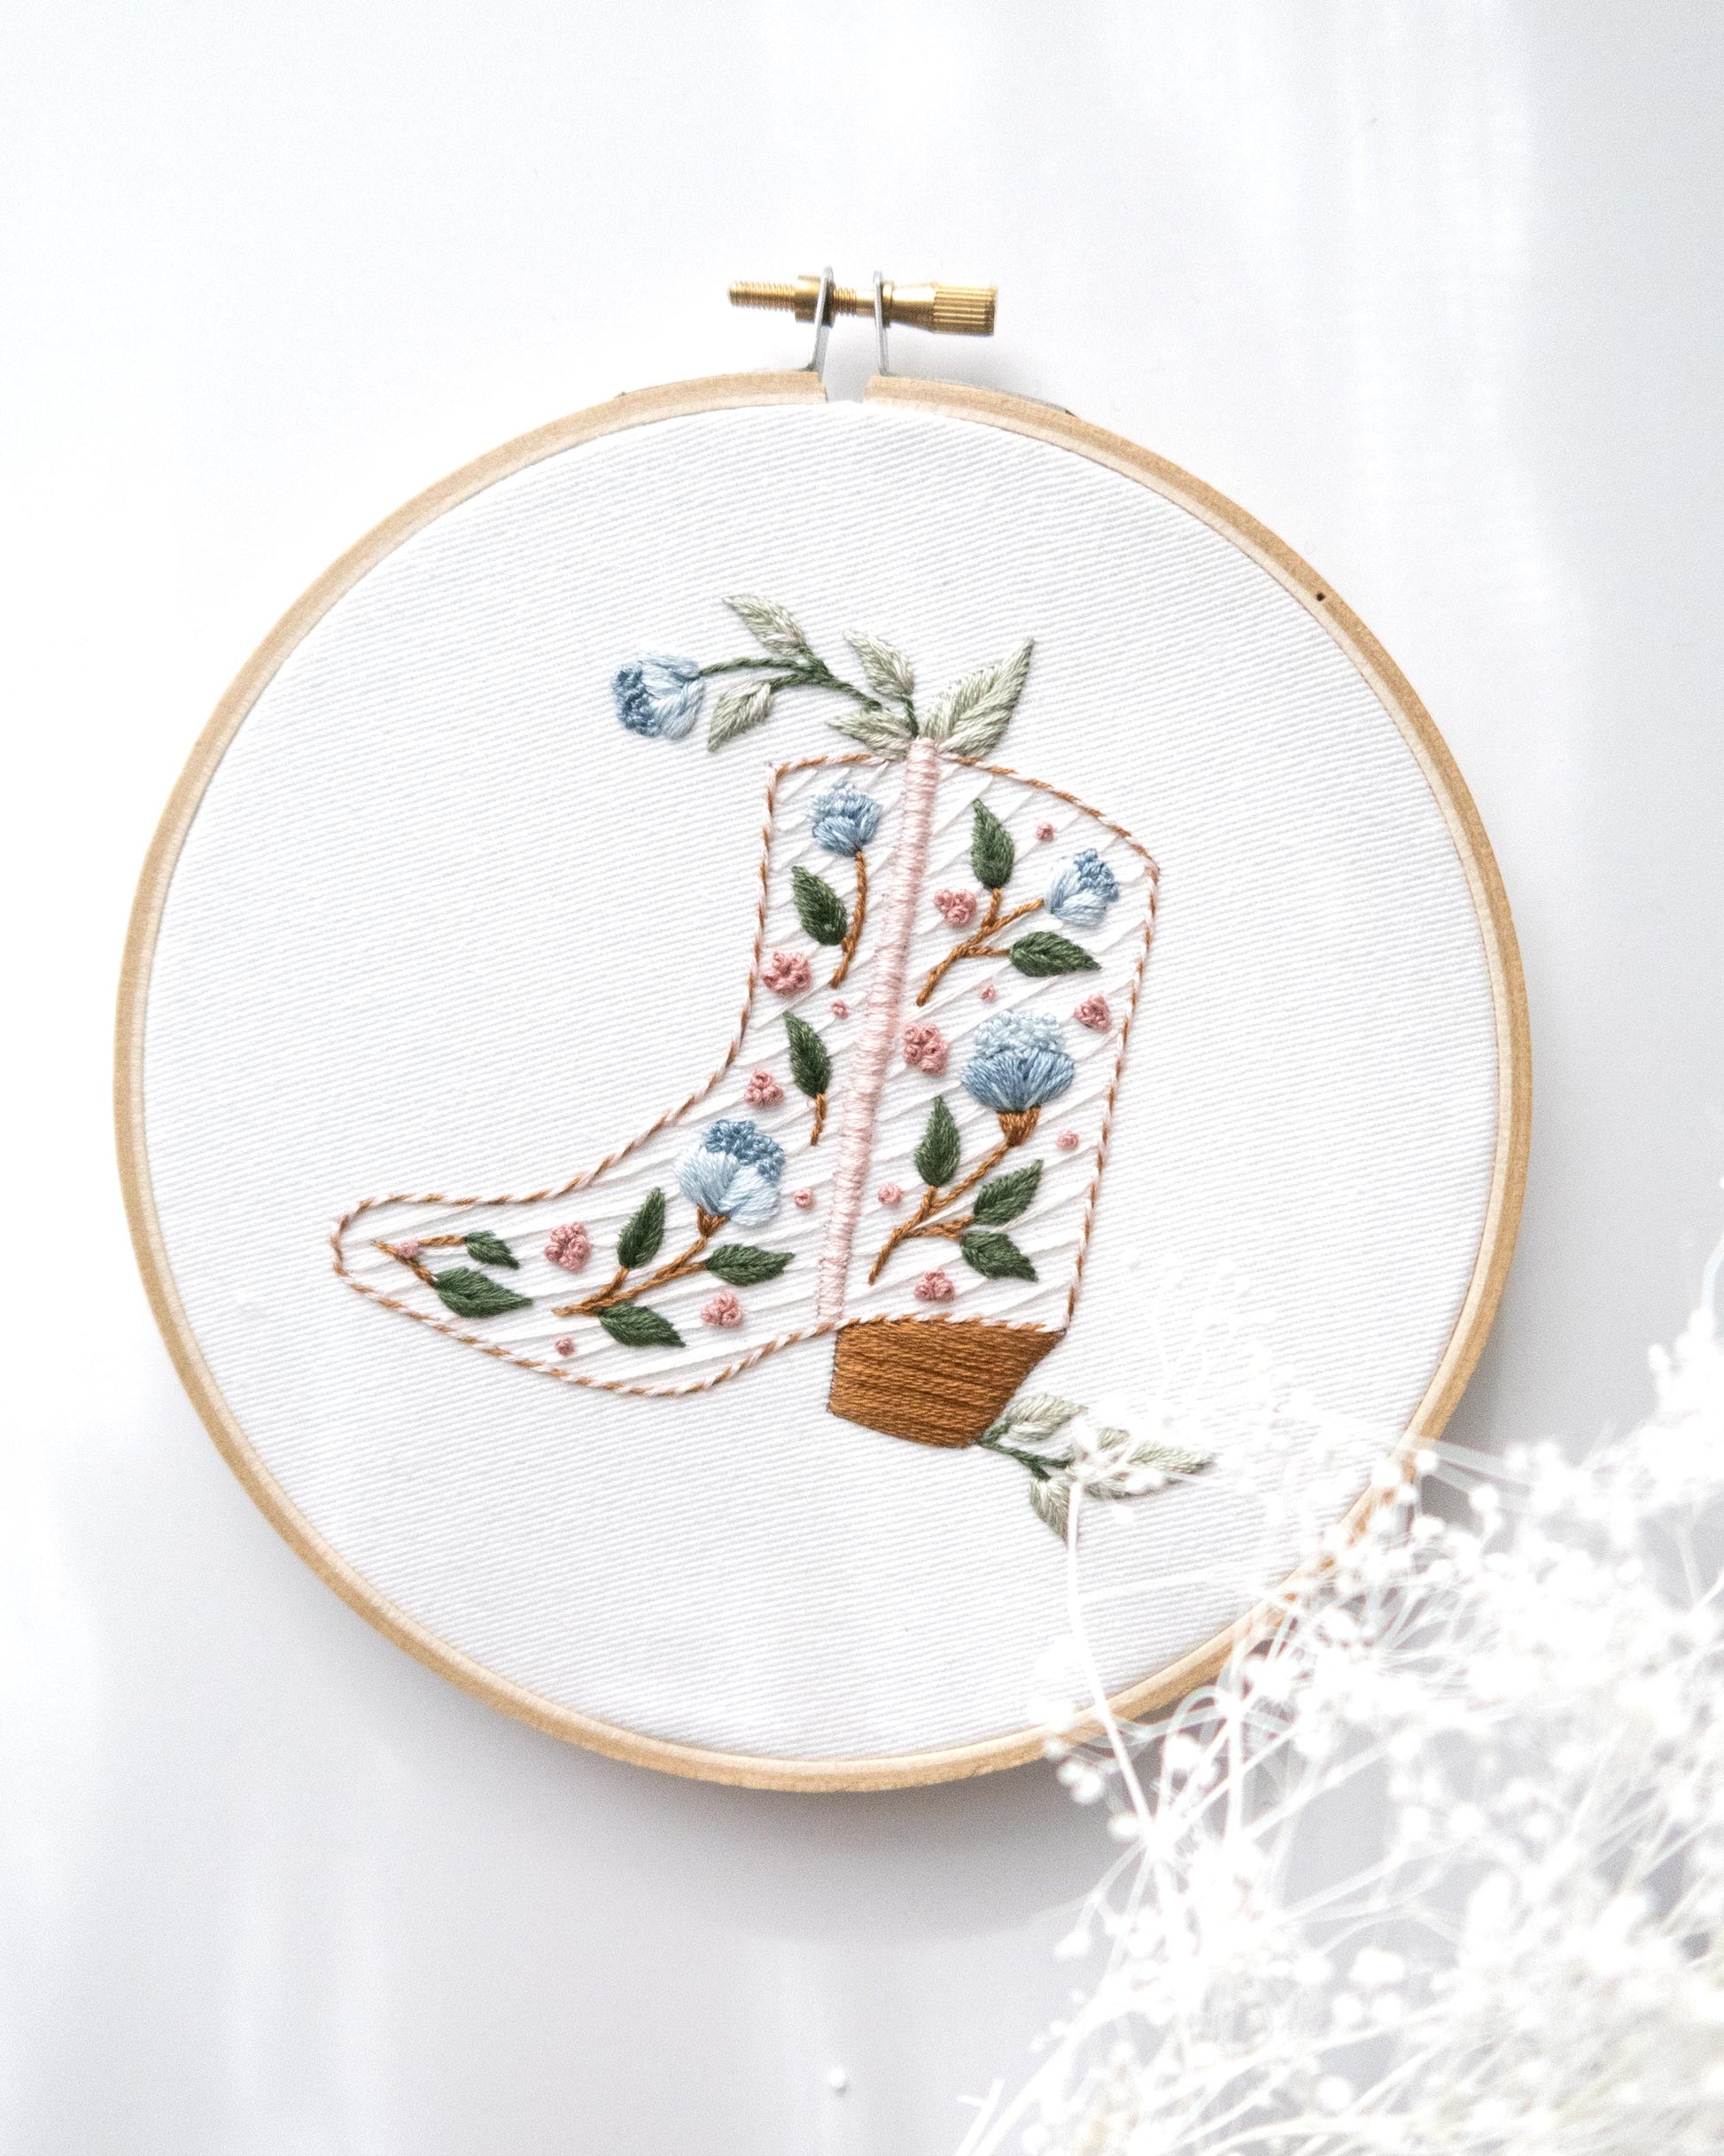 Floral Cowboy Boot Hand Embroidery Pattern – Emily June